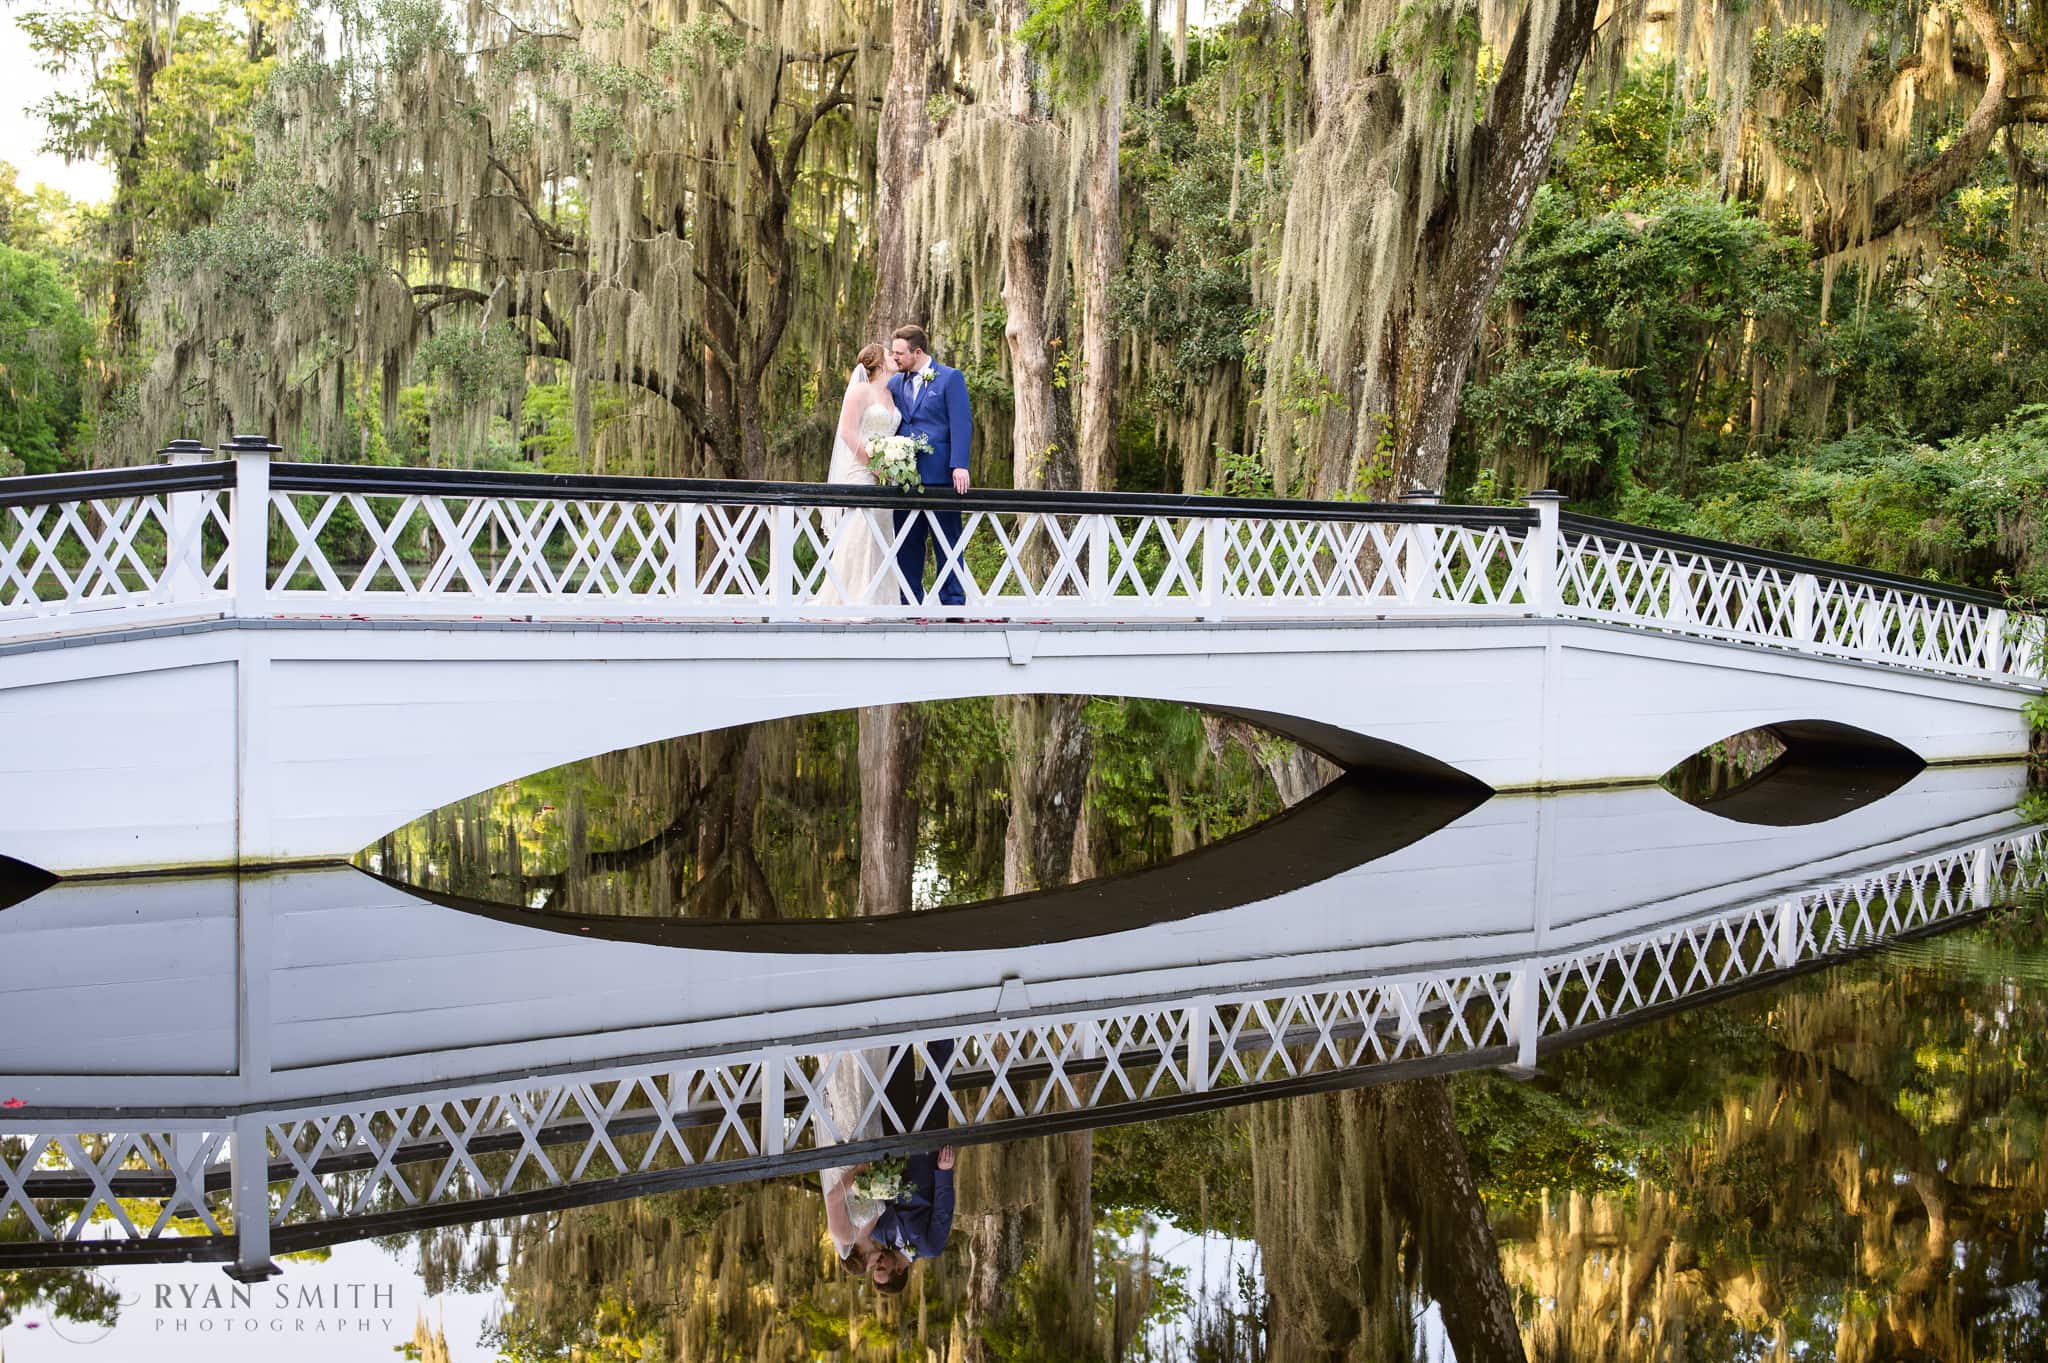 Kiss on the white bridge with reflection in the water - Magnolia Plantation